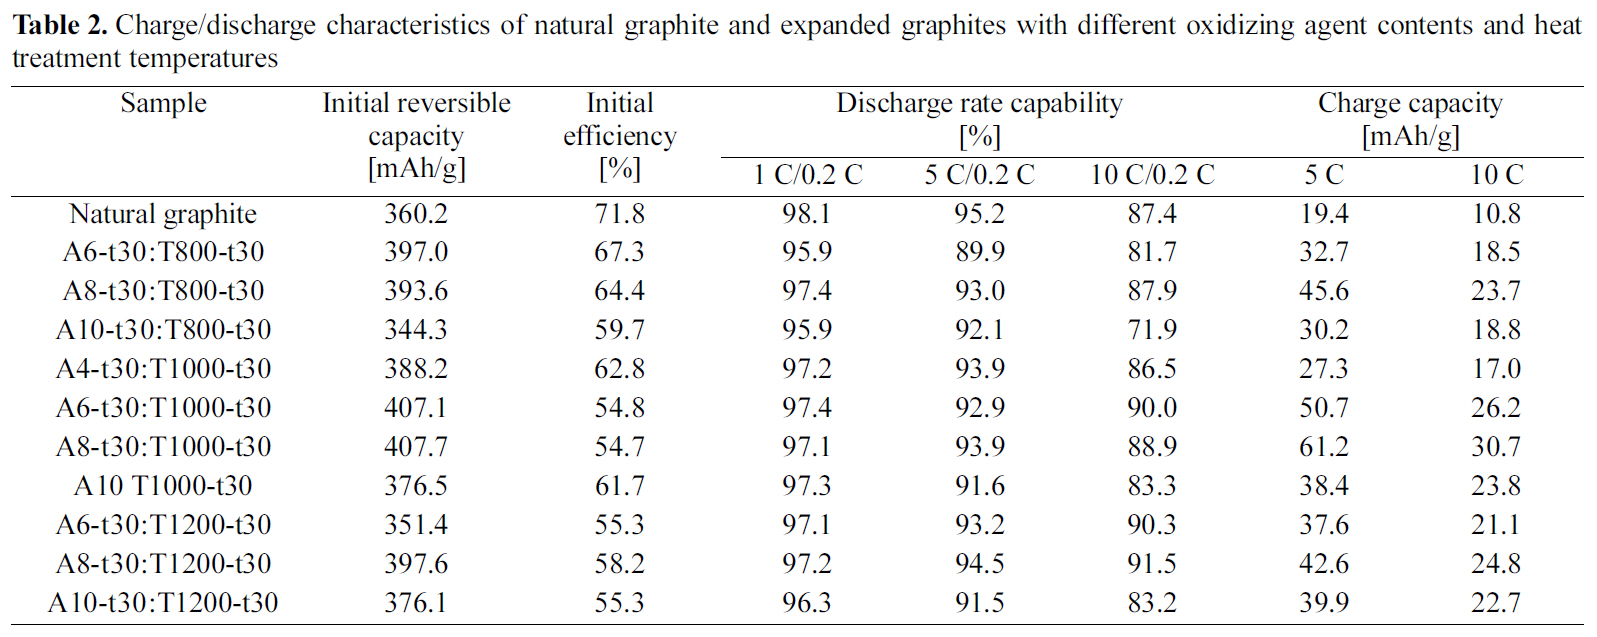 Charge/discharge characteristics of natural graphite and expanded graphites with different oxidizing agent contents and heat treatment temperatures